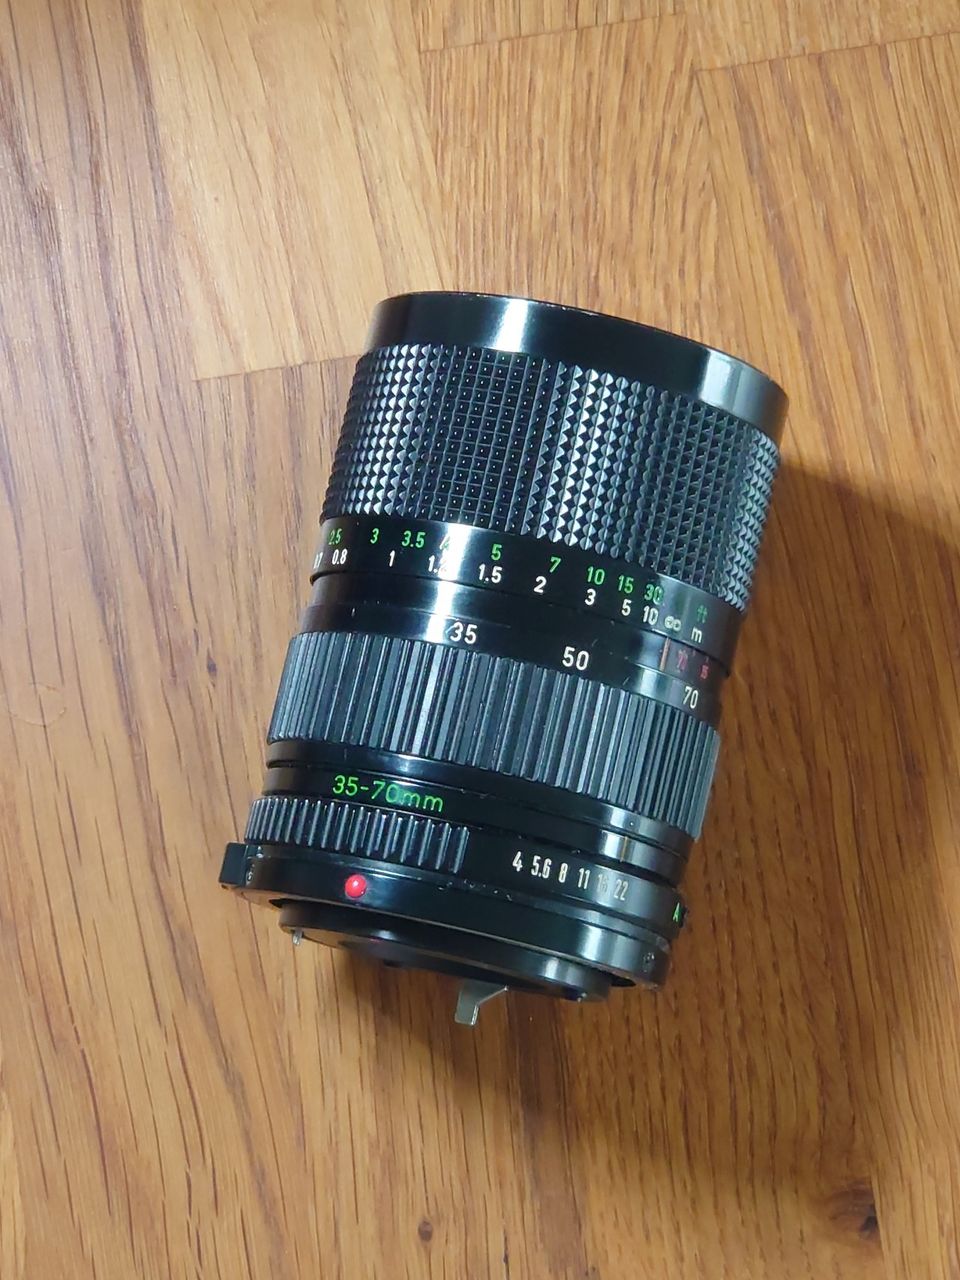 Canon Zoom Lens FD 35-70mm f/4